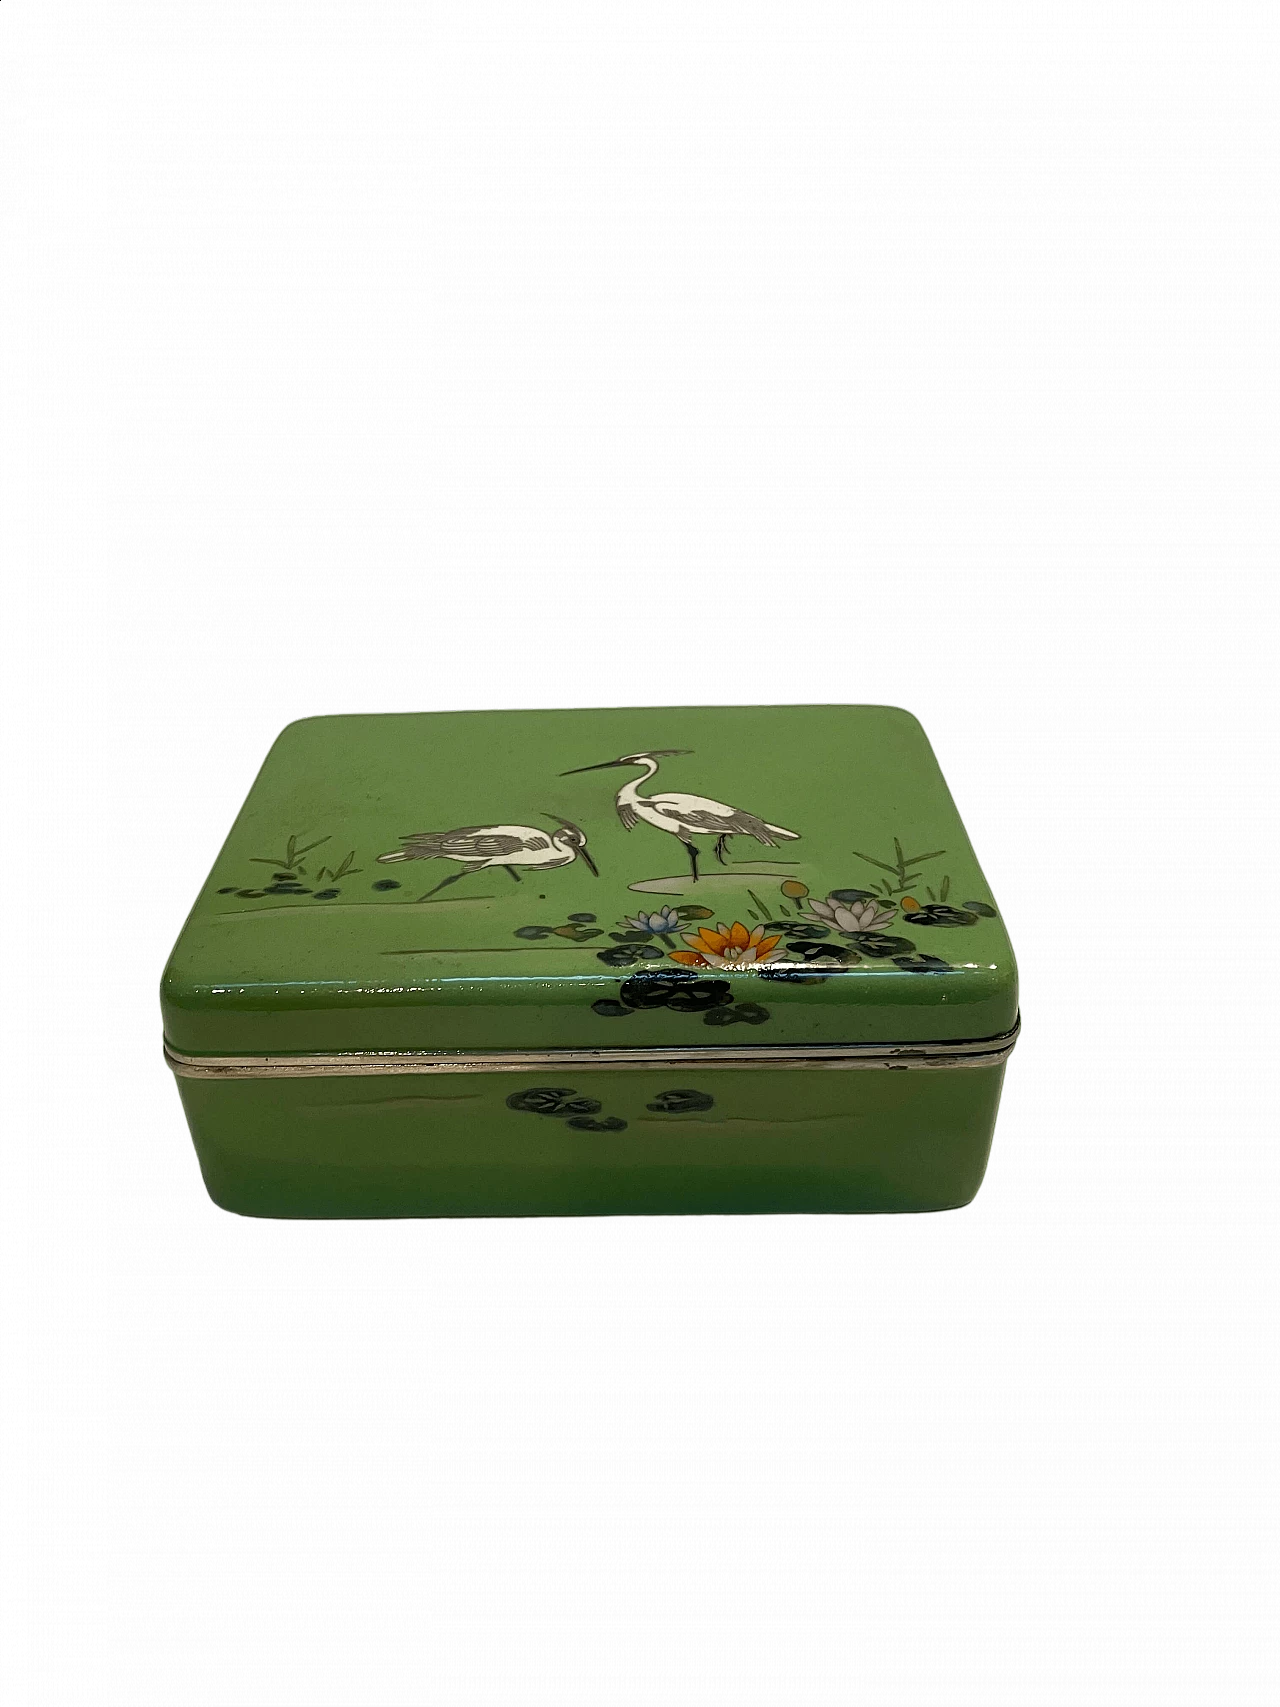 Japanese cloisonné enameled metal box with herons, 19th century 8